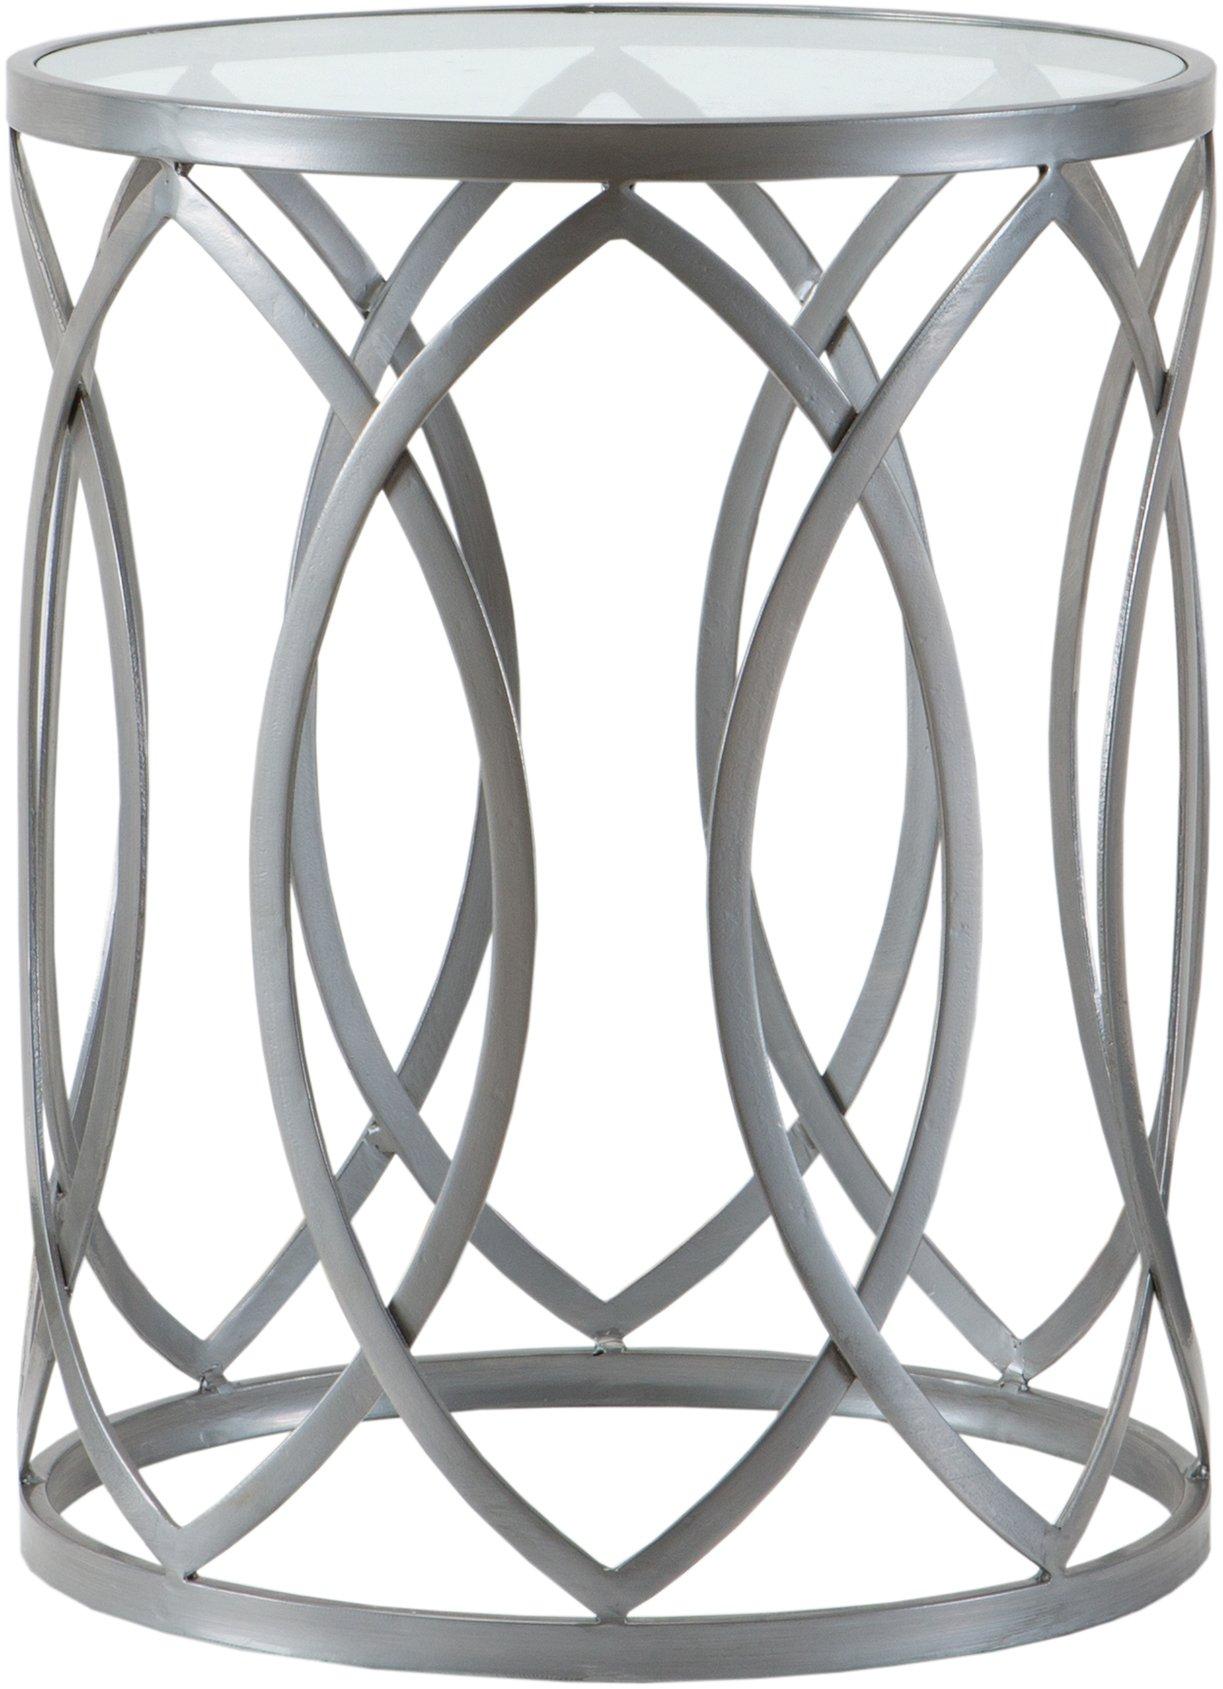 Madison Park Gaige Silver Metal Eyelet Accent Table